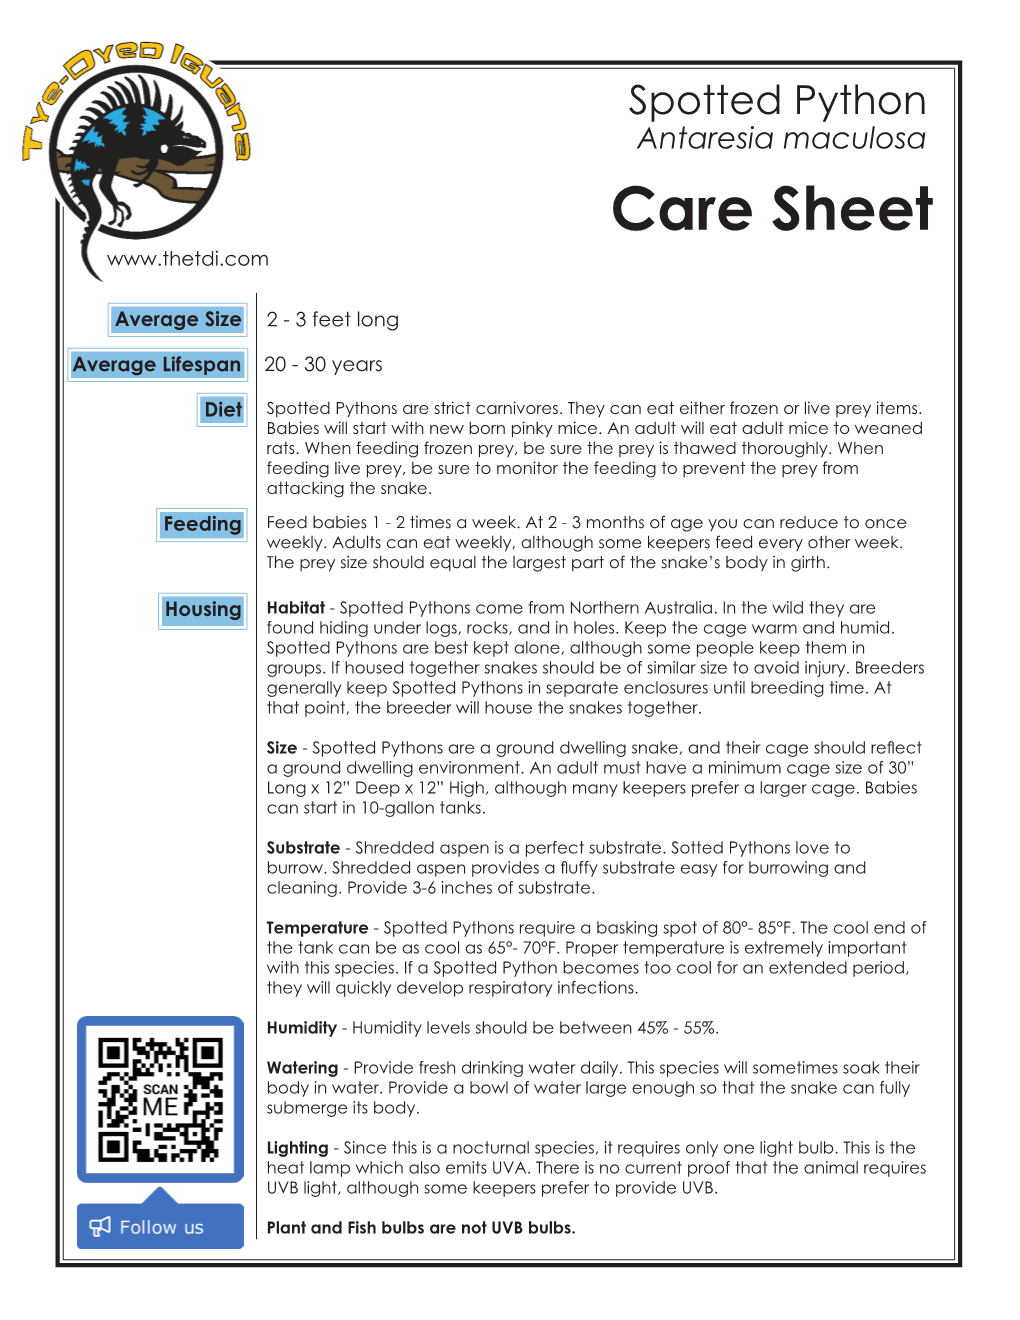 Spotted Python Antaresia Maculosa Care Sheet